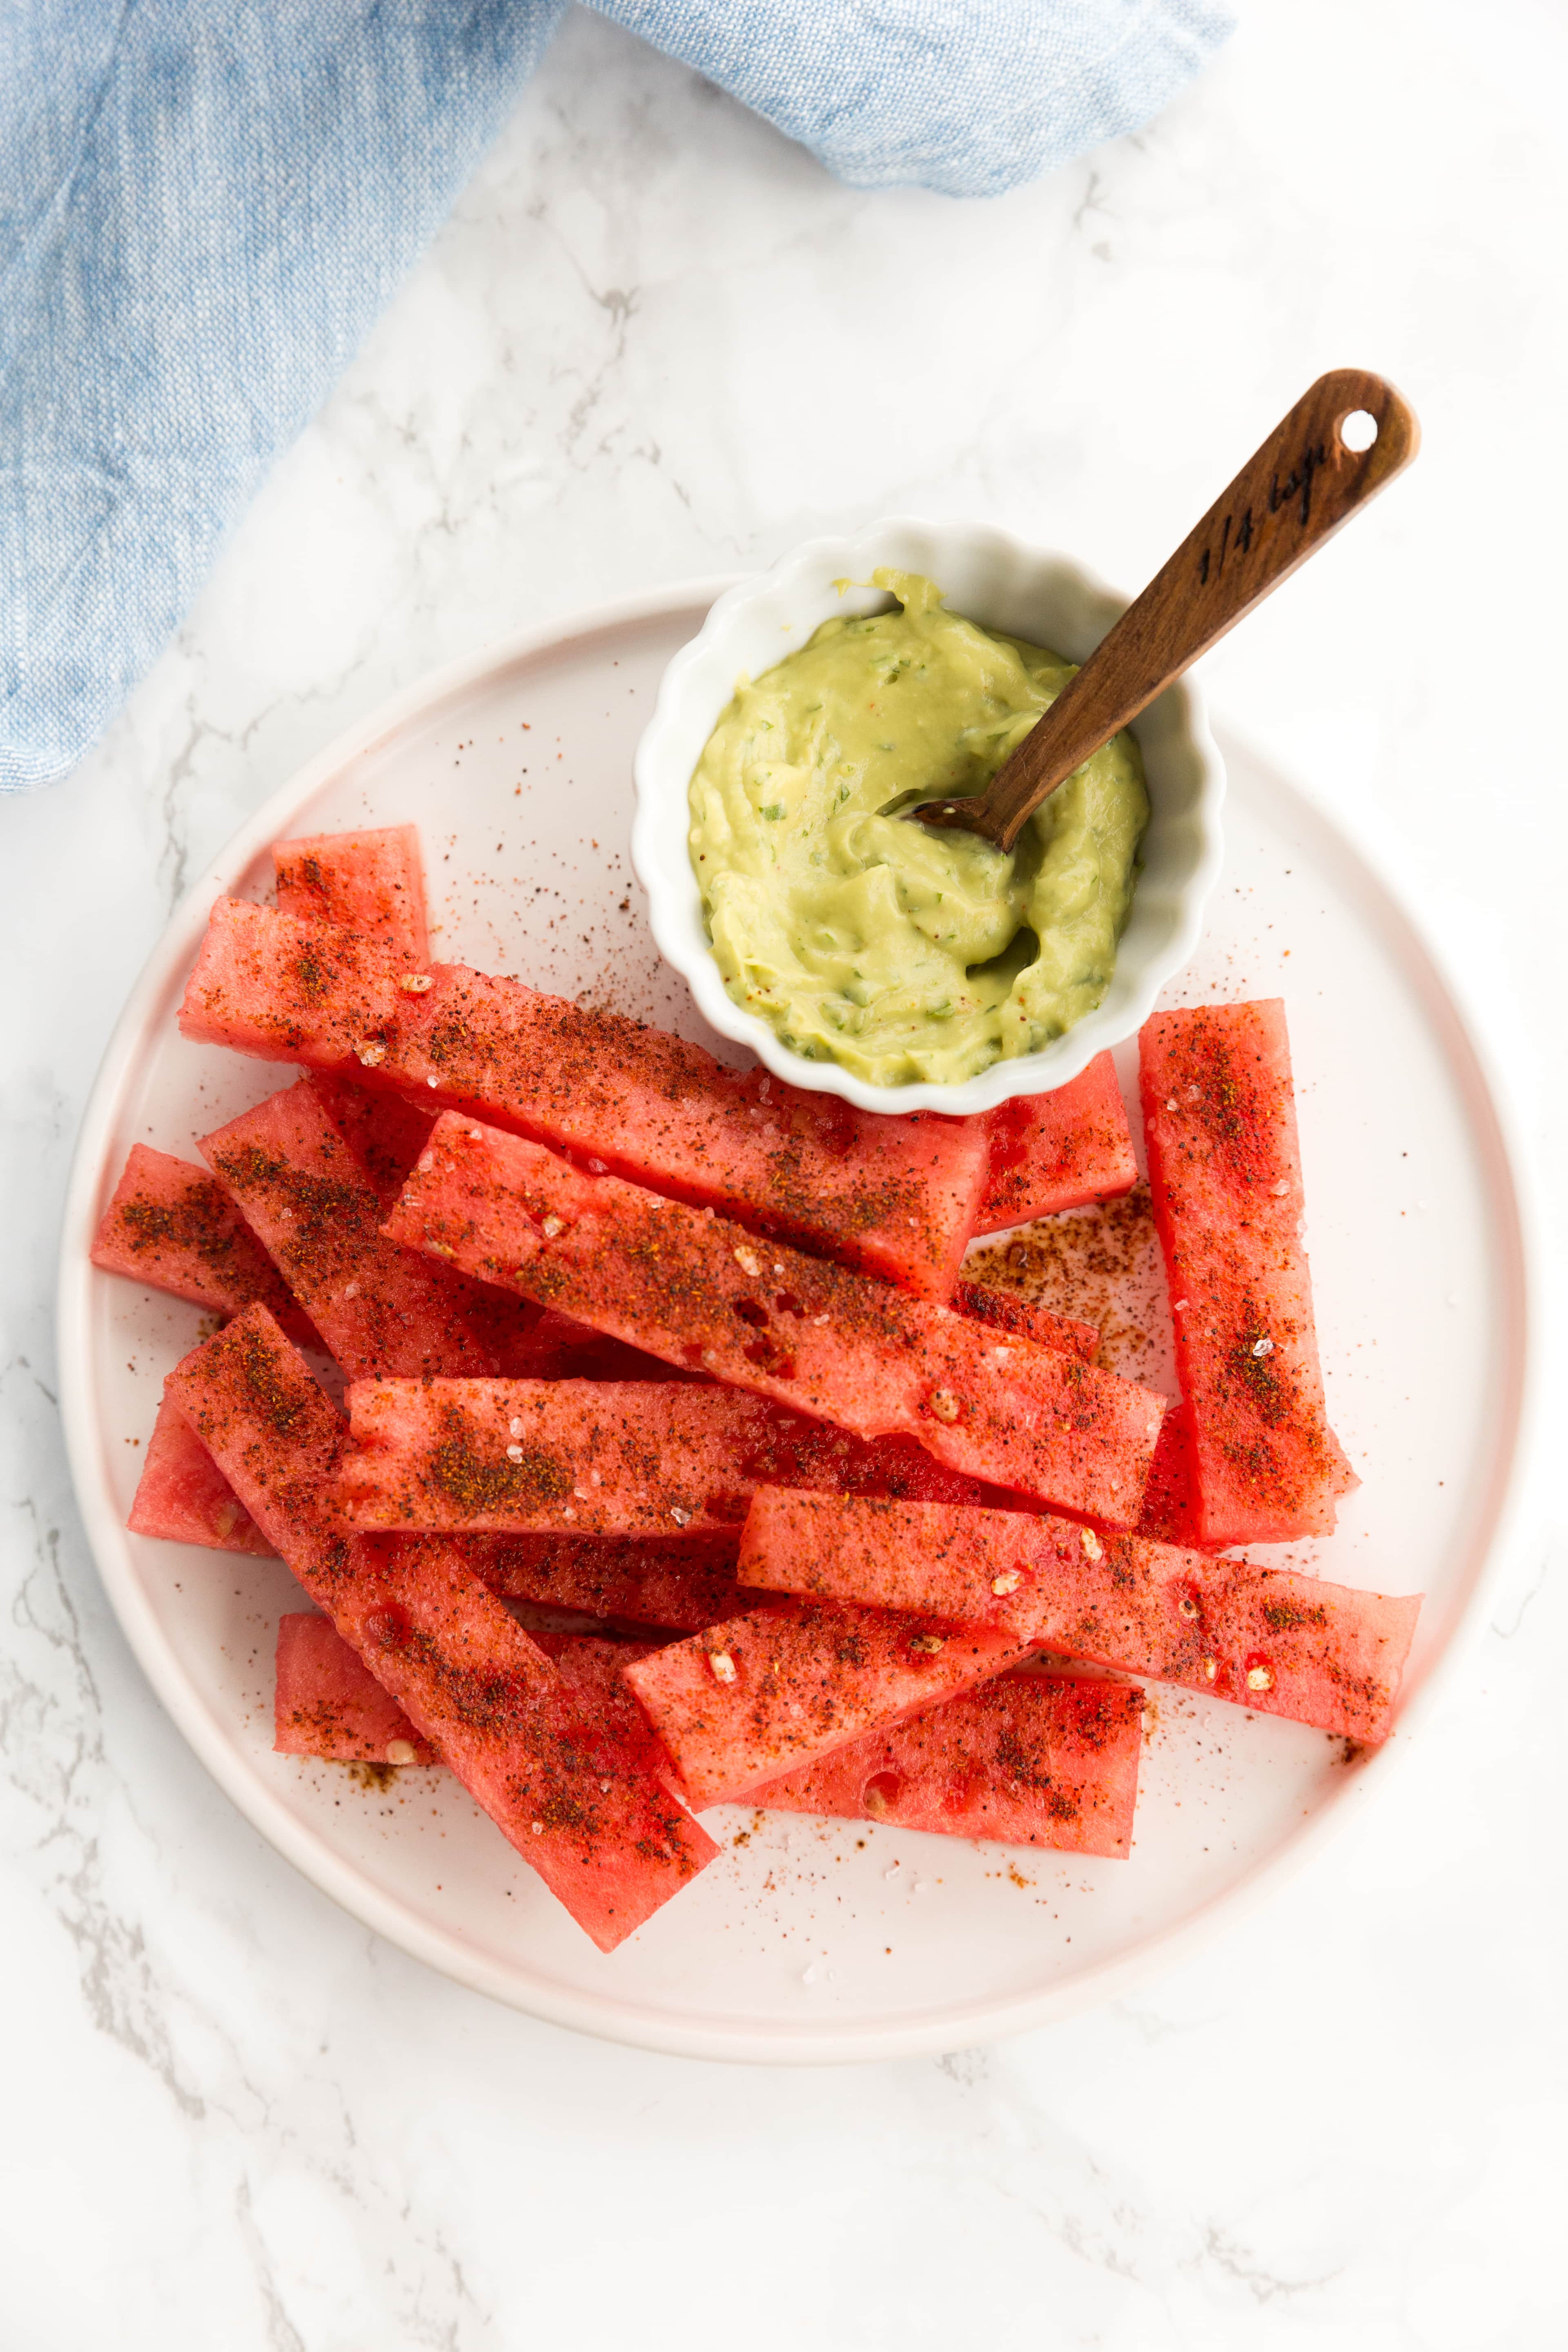 Spicy Watermelon Wedges with Spiralized Pickled Onions